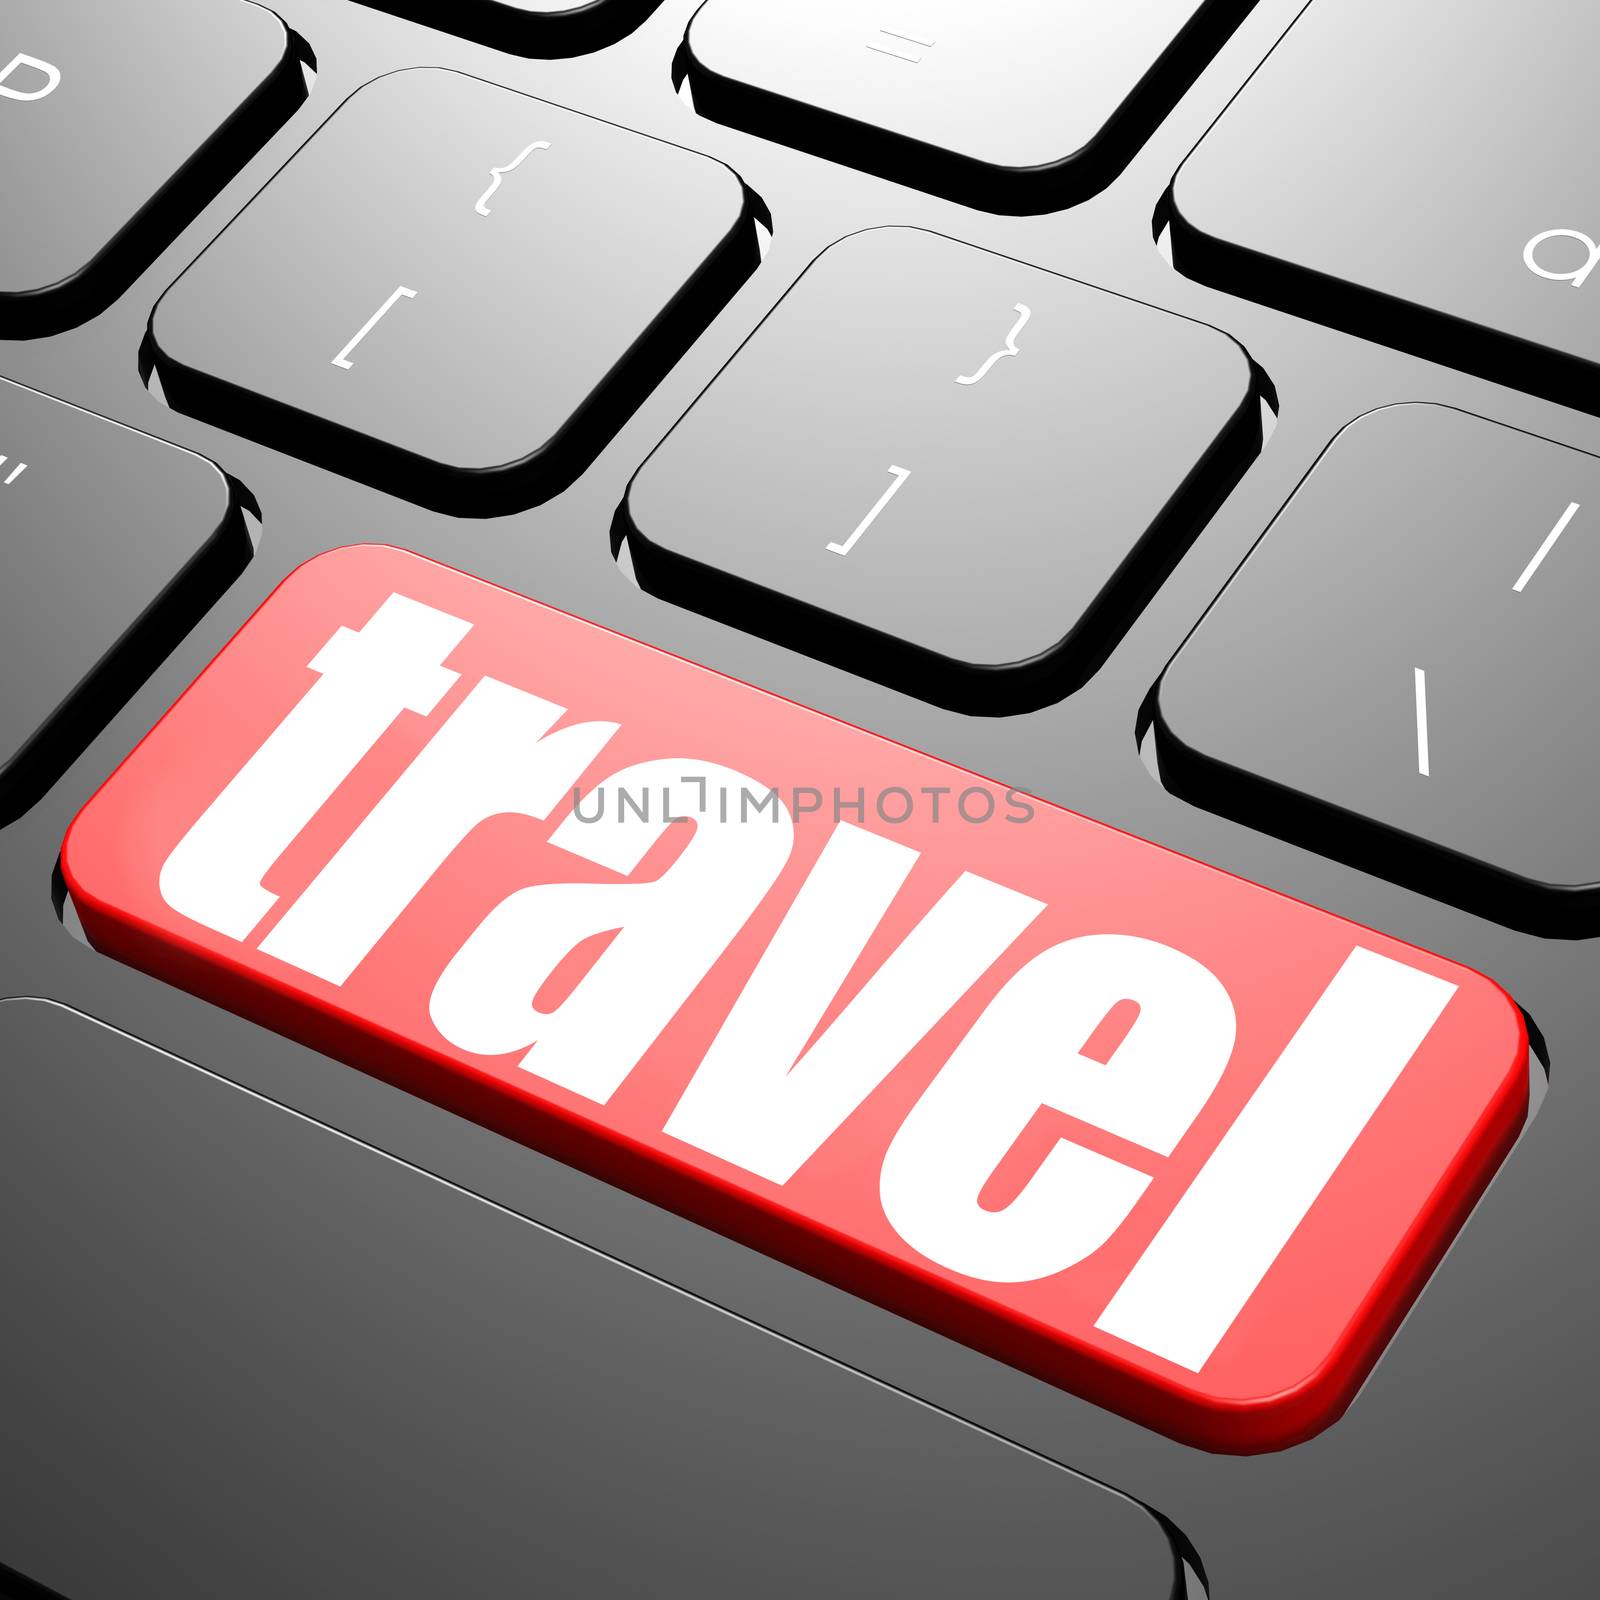 Keyboard with travel text image with hi-res rendered artwork that could be used for any graphic design.